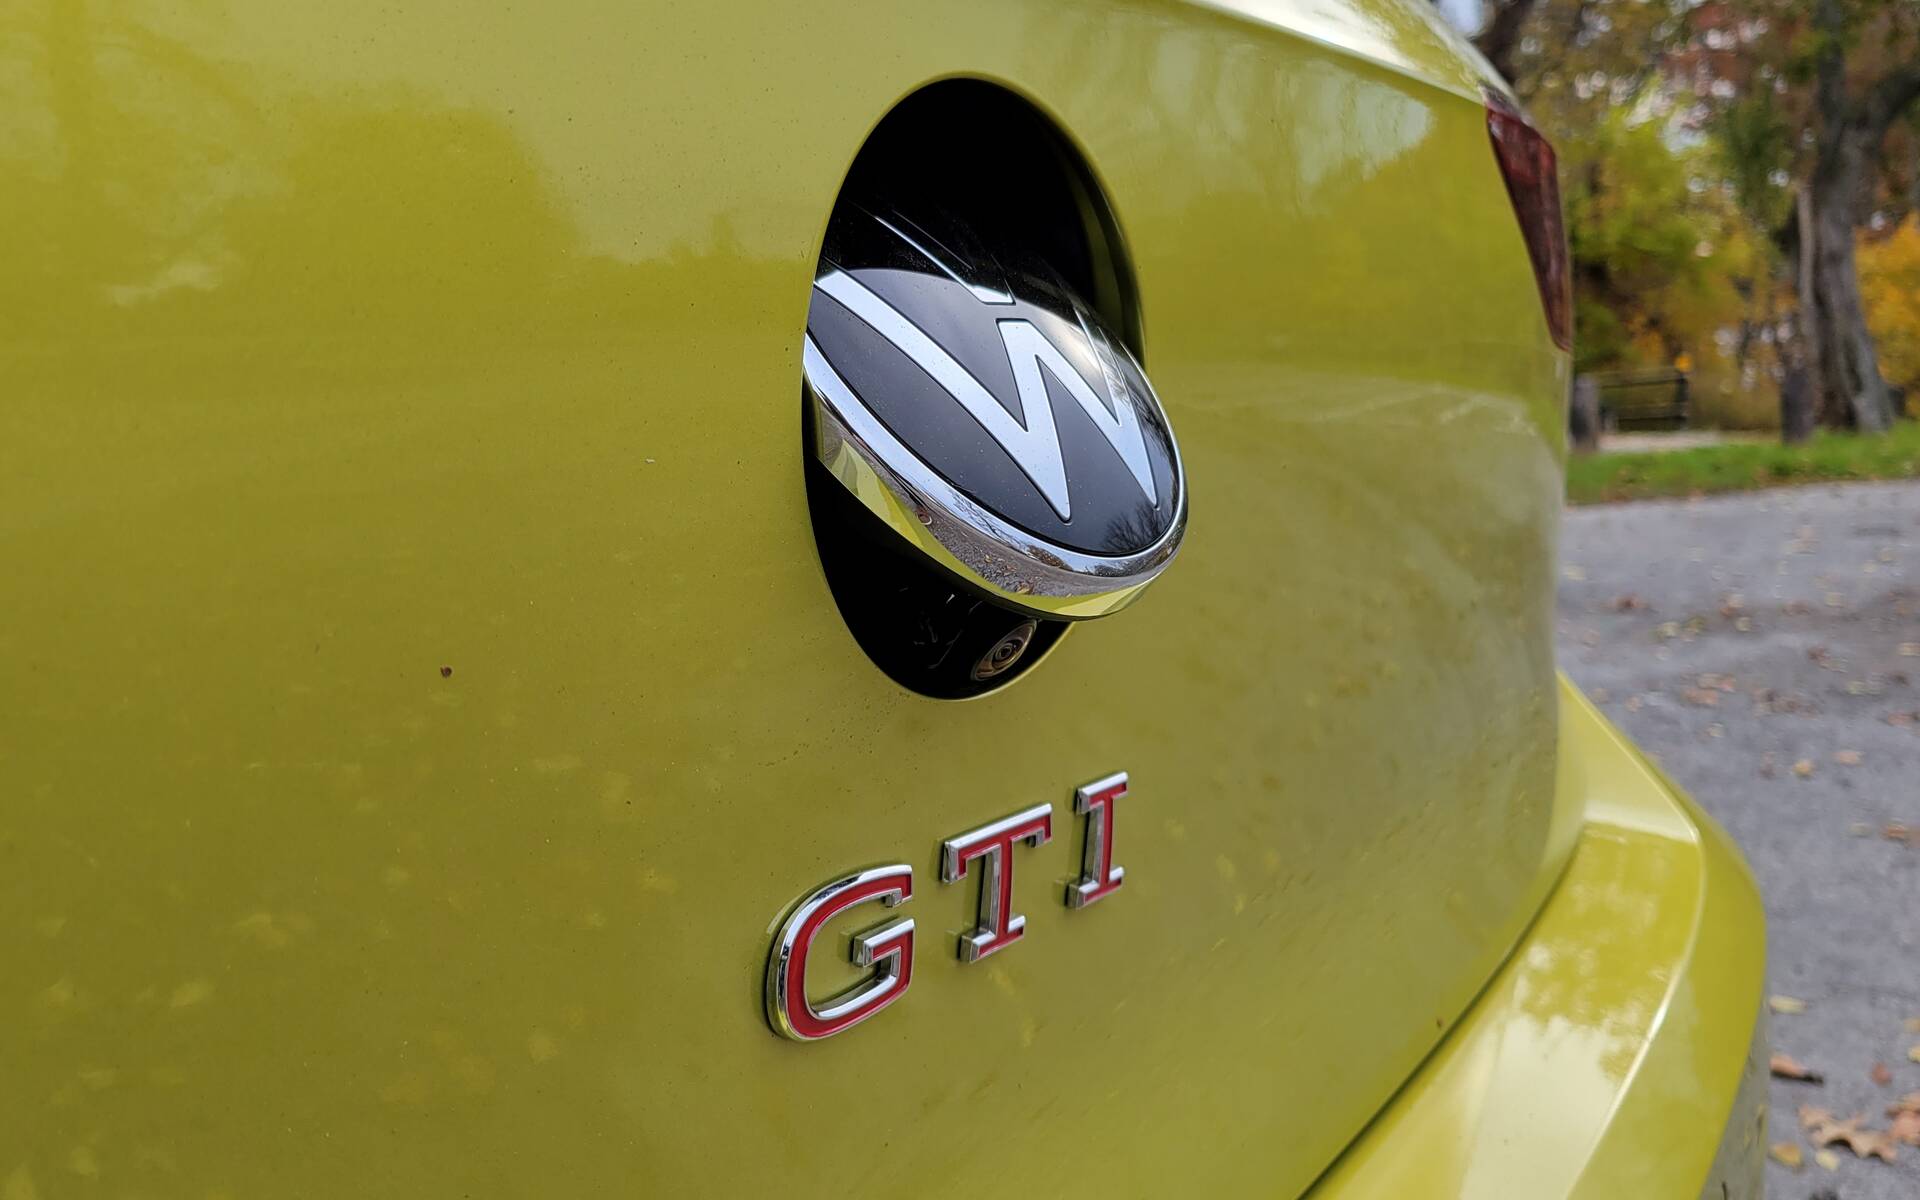 Next-Gen Volkswagen Golf, Golf GTI to be Fully Electric - The Car Guide